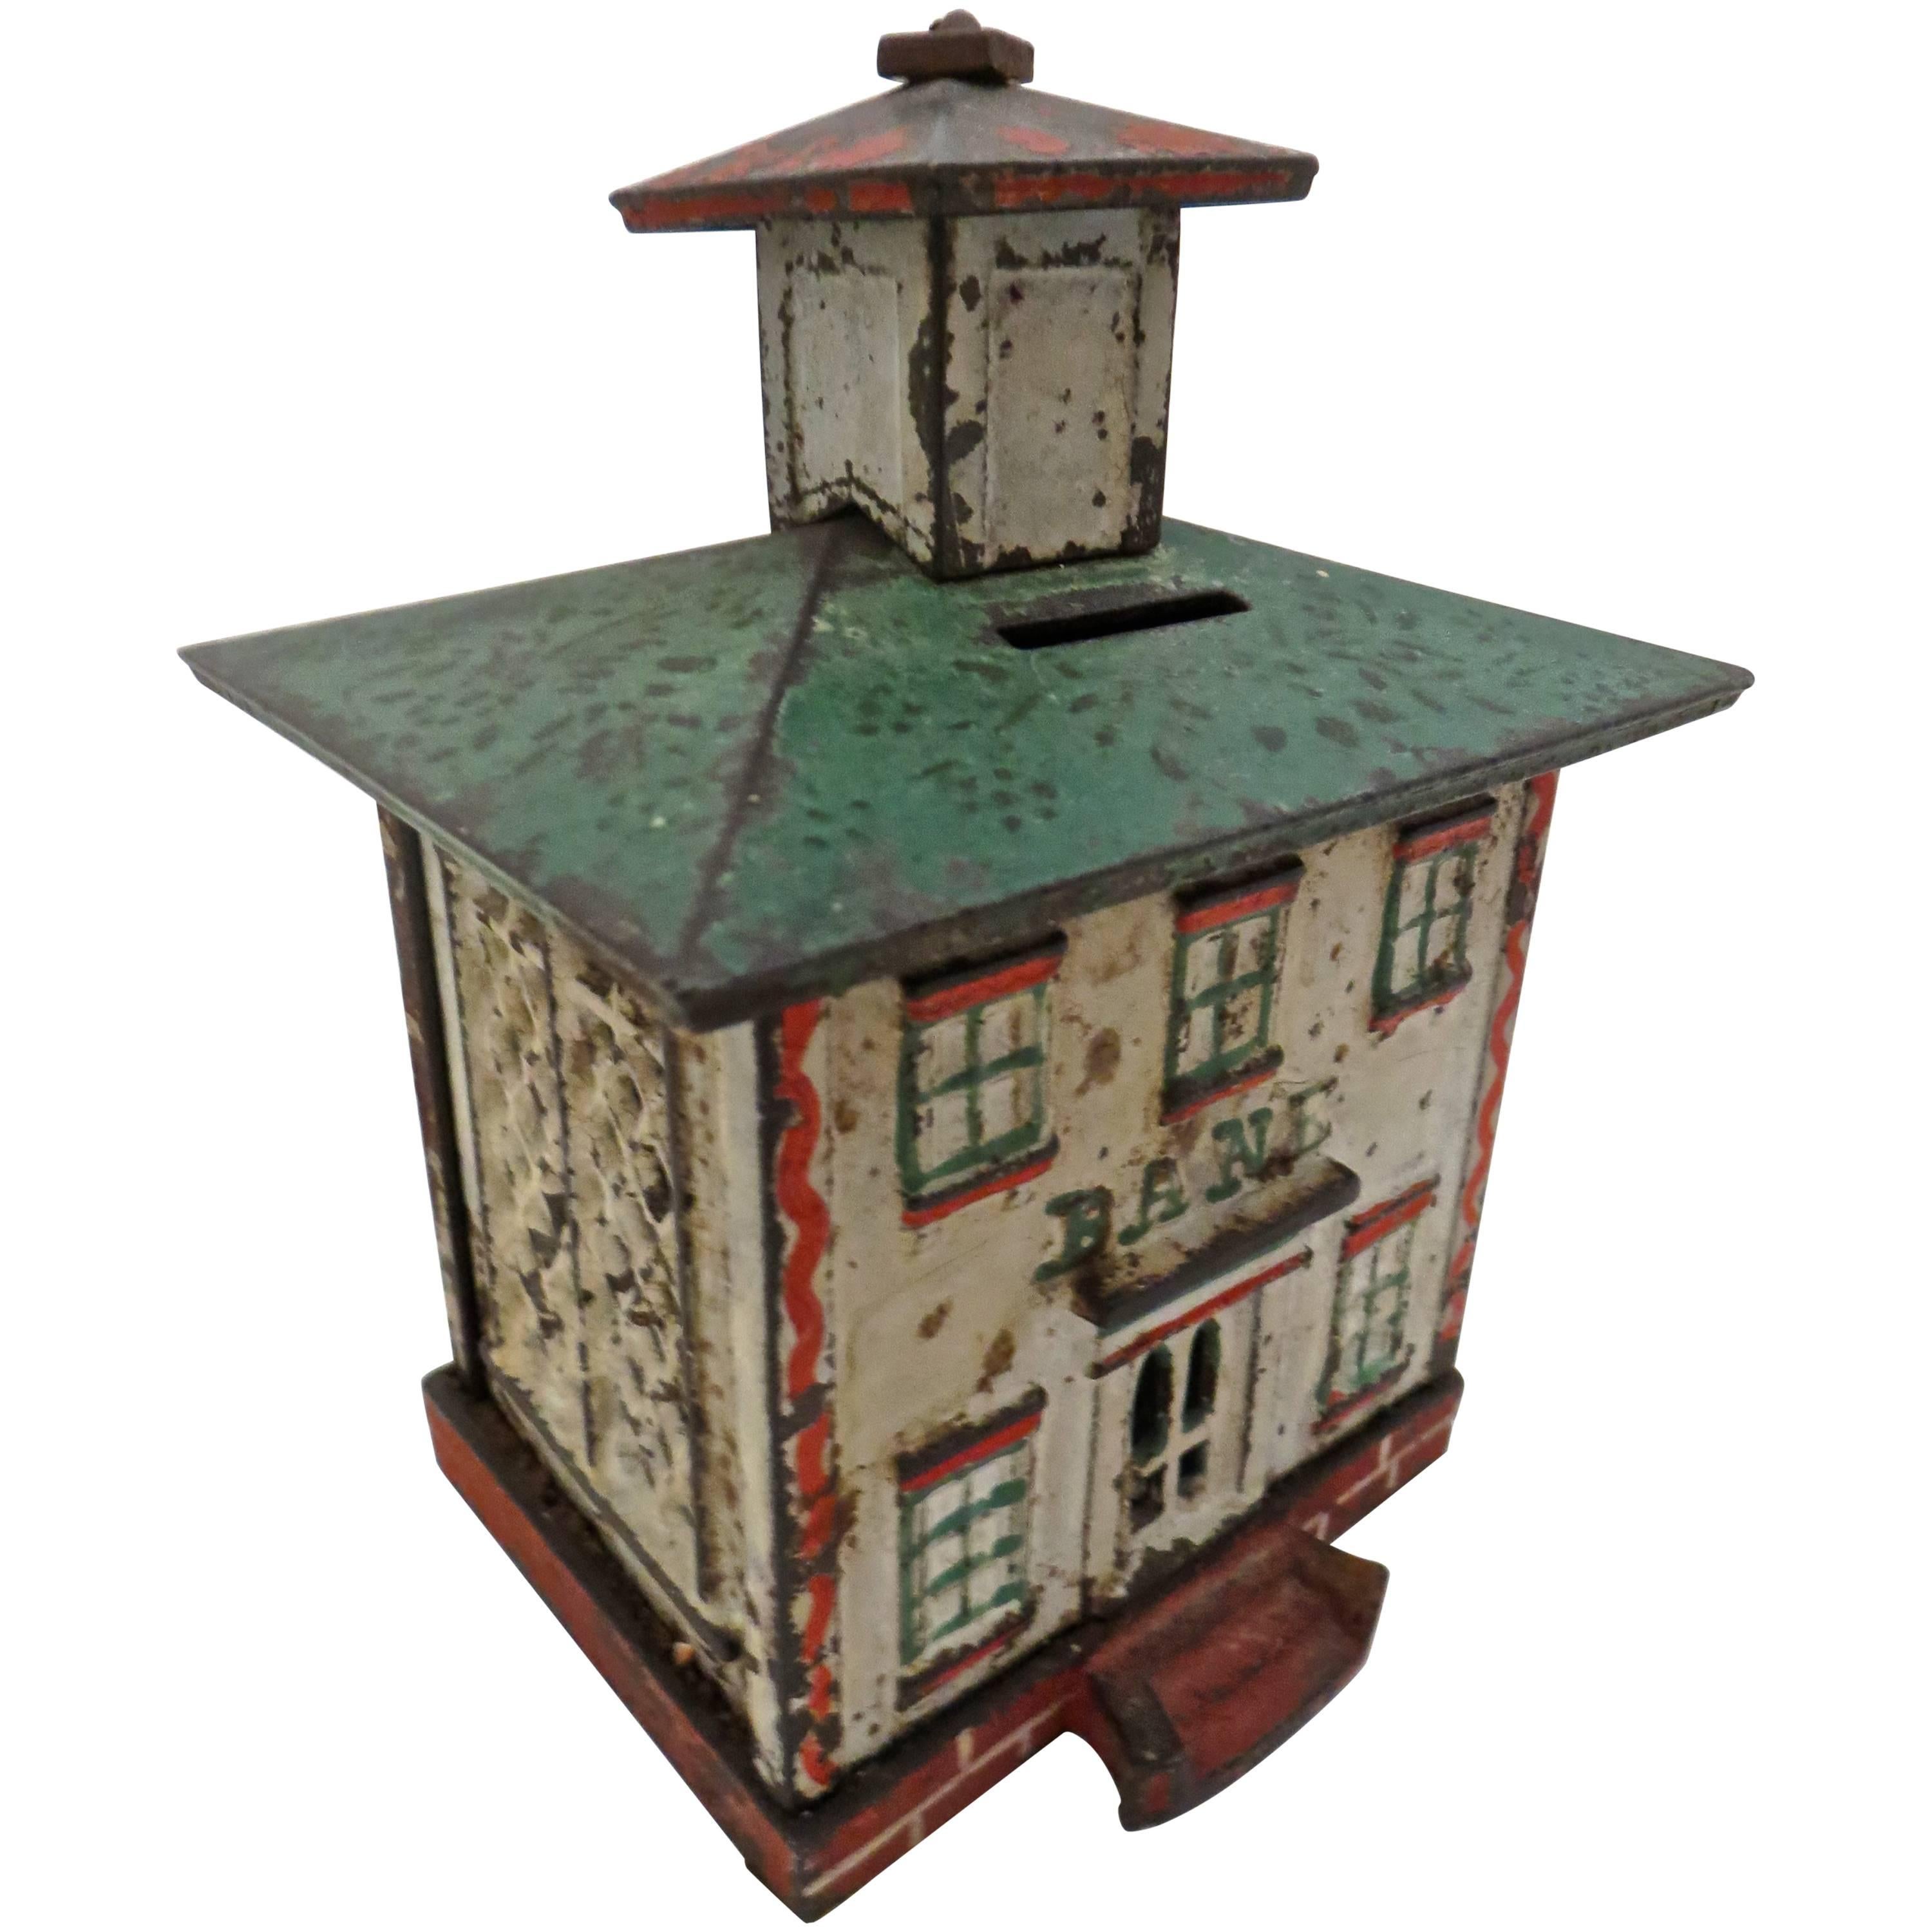 "Cupola" Building Still Bank by Vermont Novelty Works, American, circa 1869